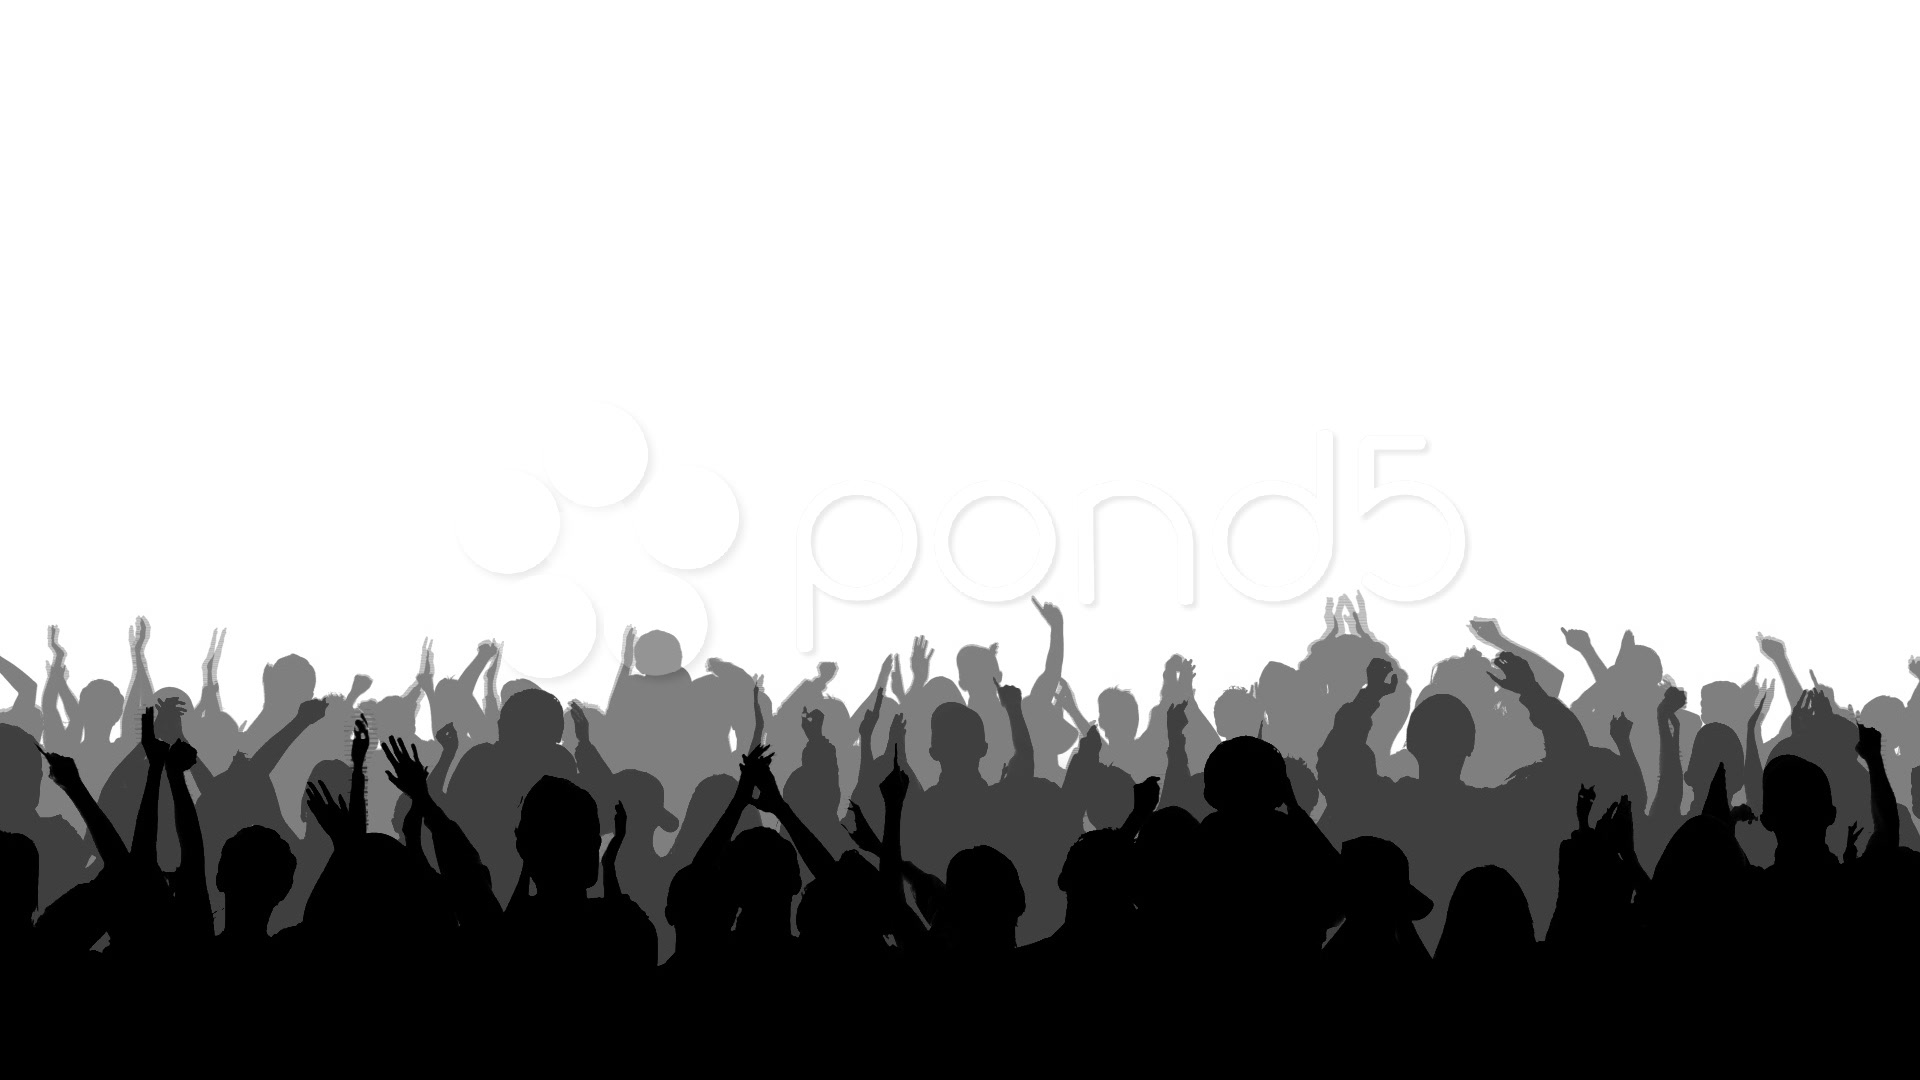 Sports Fans Cheering Silhouette Crowd Silhouettes